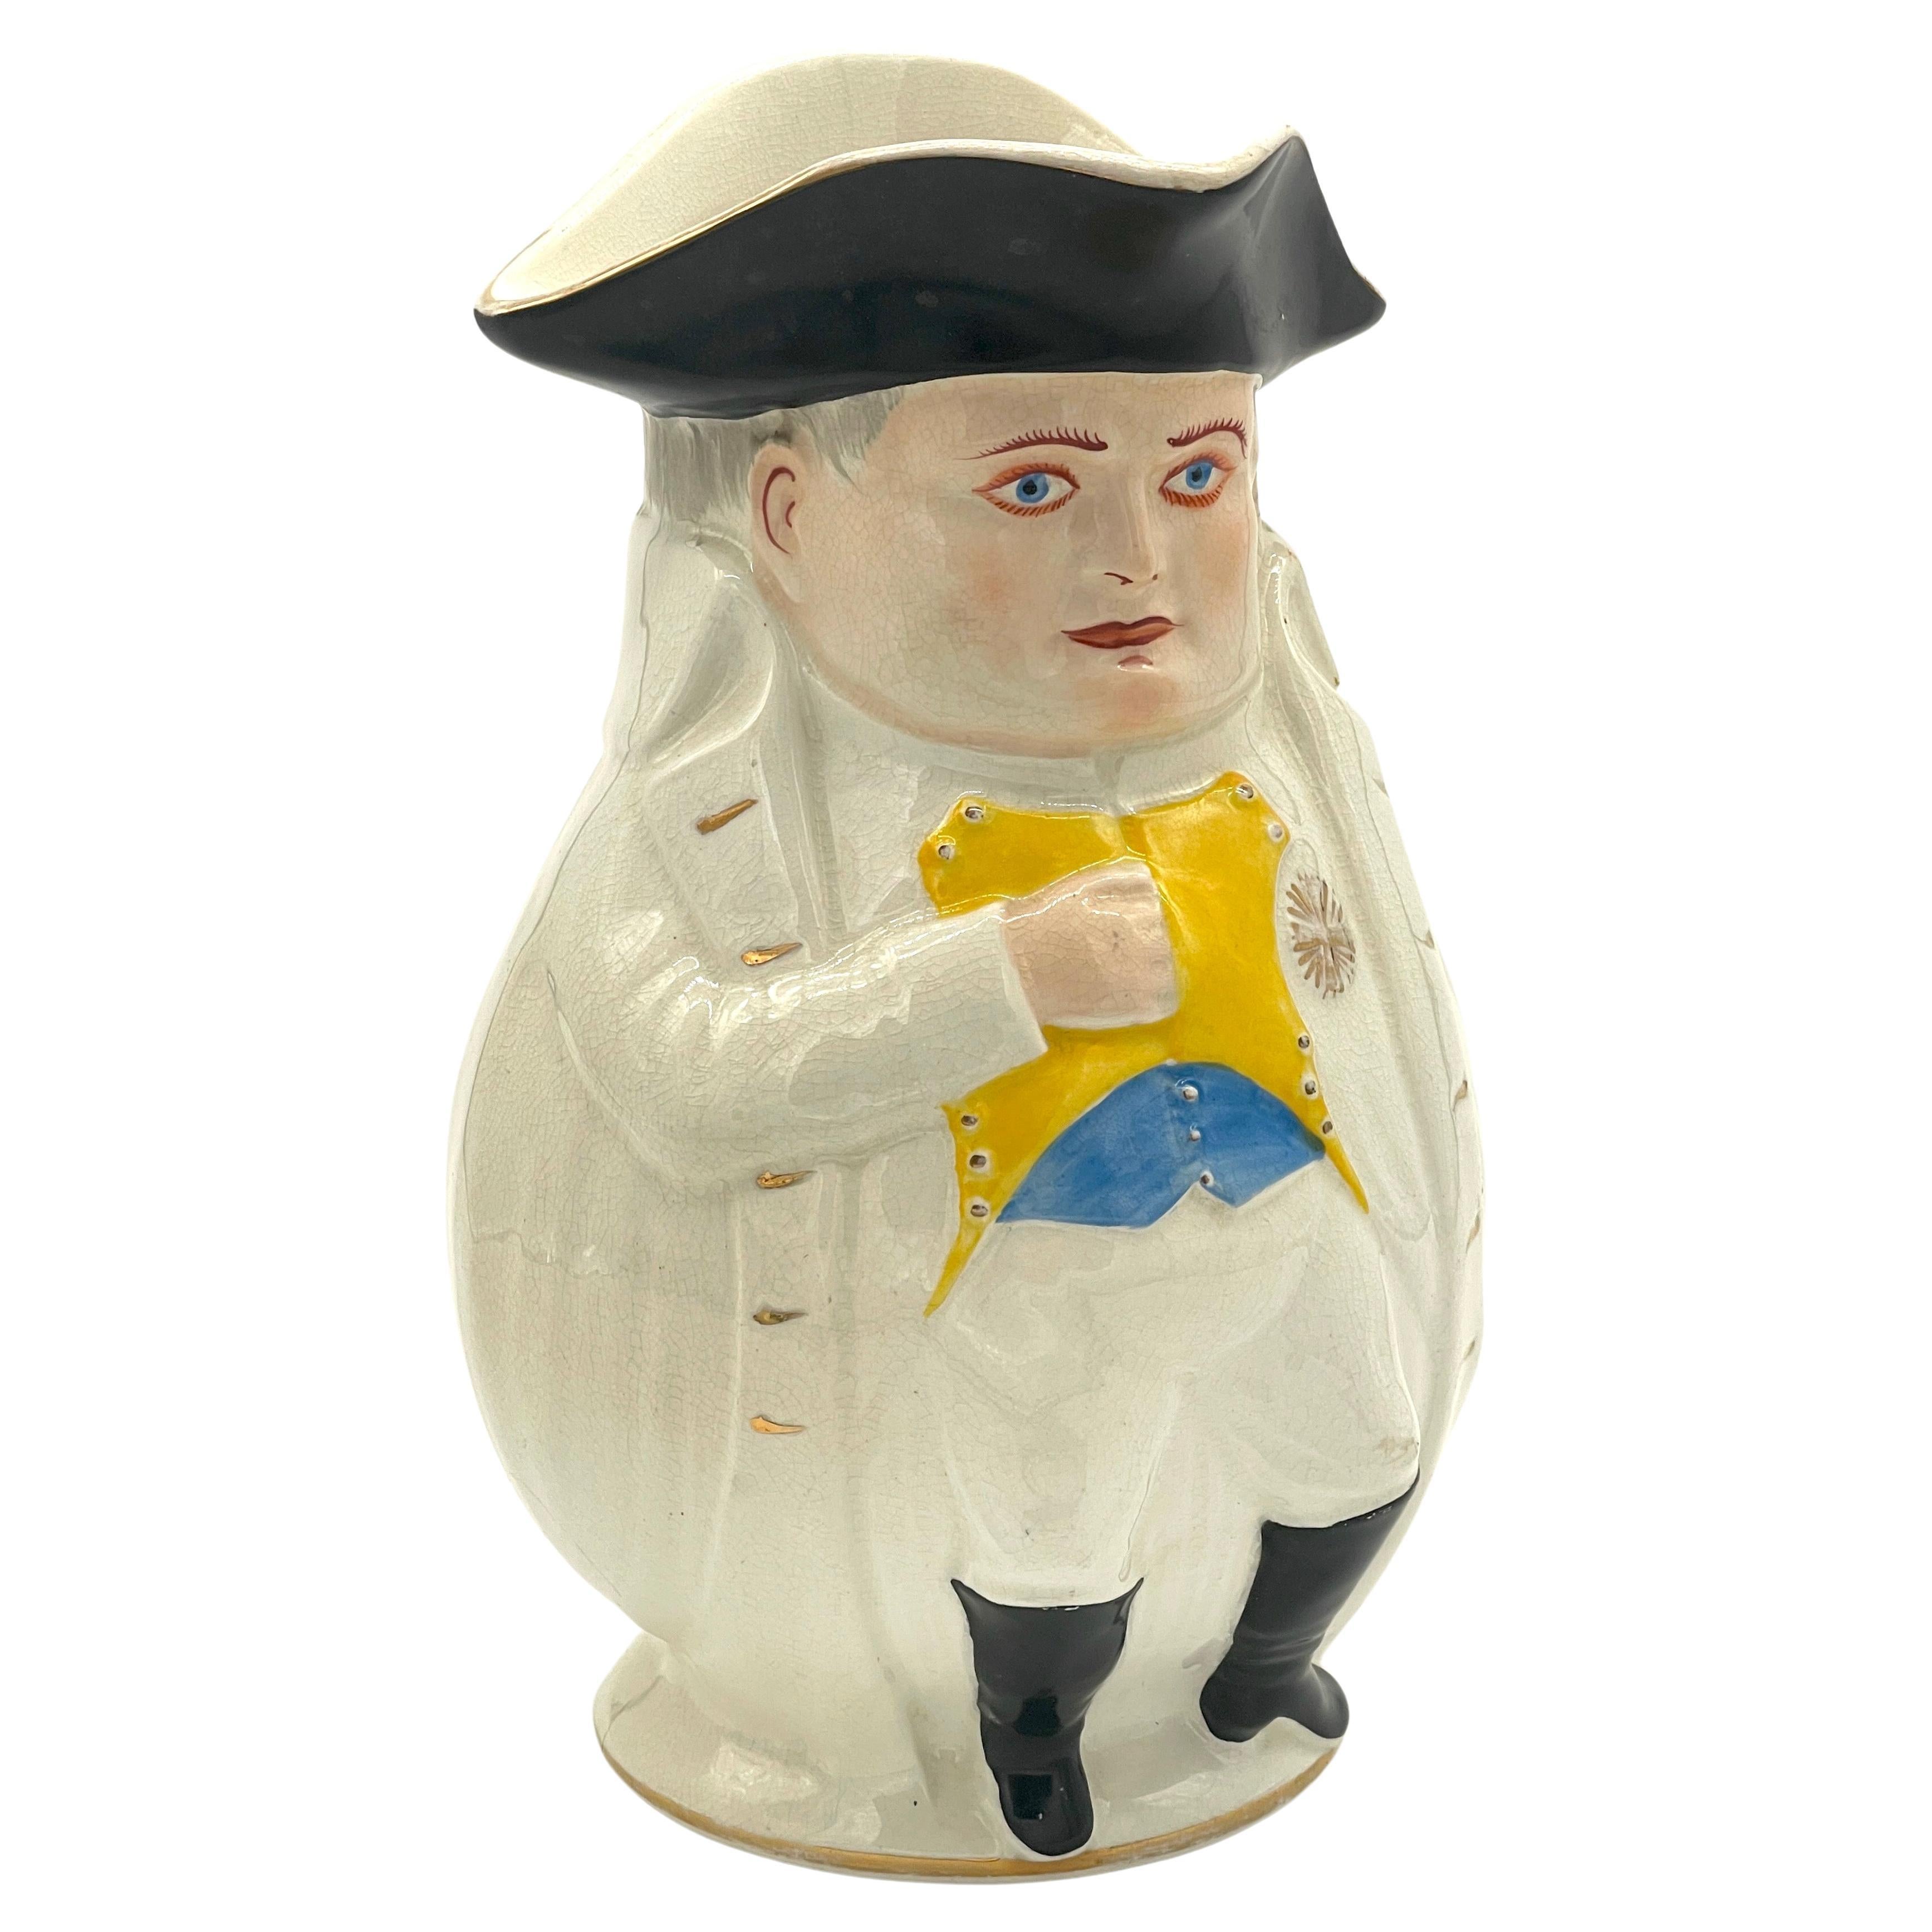 President William McKinley as Napoleon Large Toby Mug, by Morris & Willmore